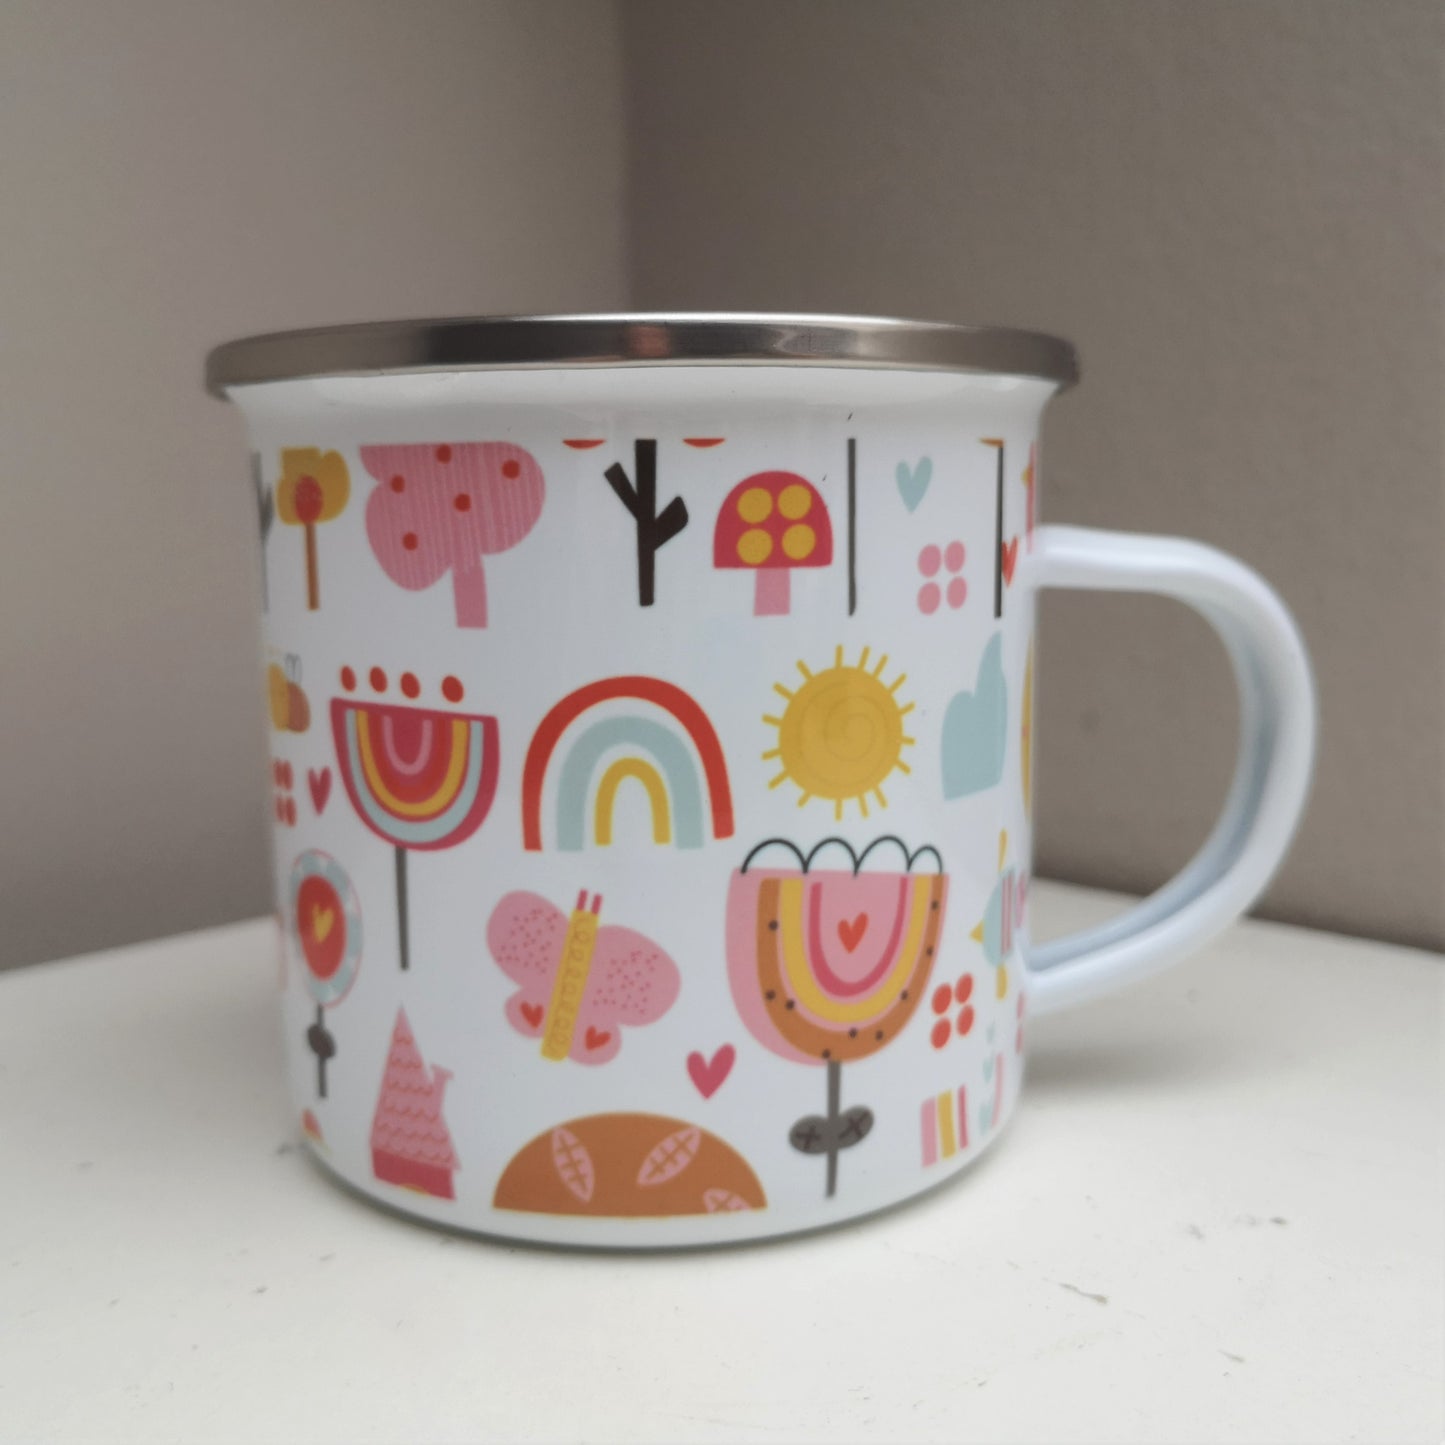 The back view of a White enamel mug with a stainless steel rim with a wraparound pink garden design and on the front a scalloped pink circle framing the owners name